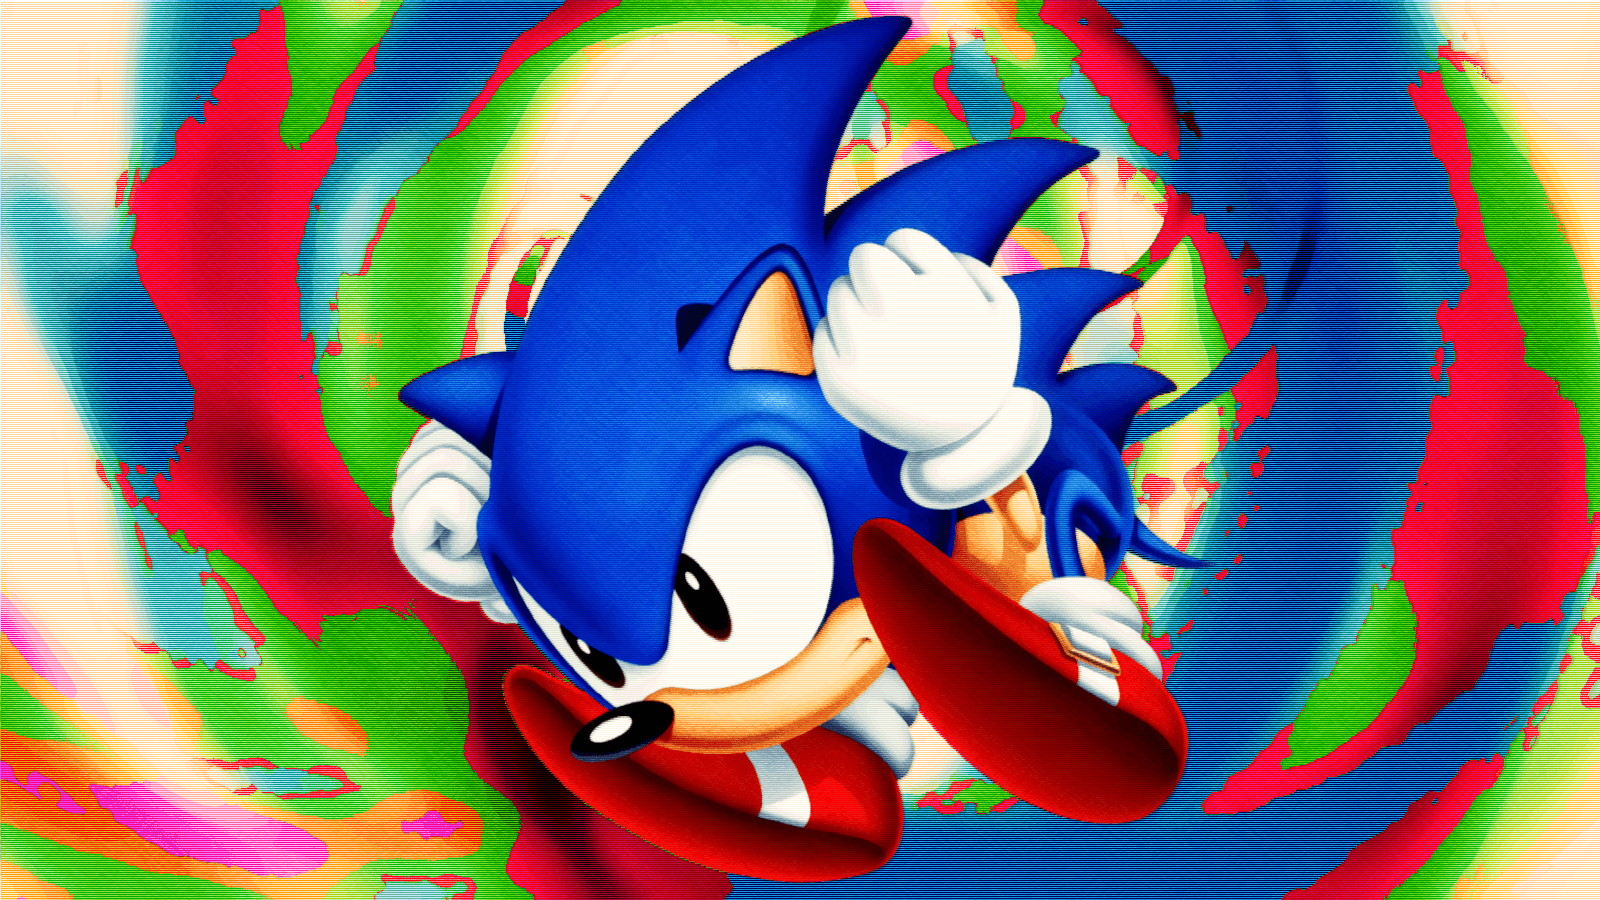 Classic Sonic the Hedgehog 3 by Light.